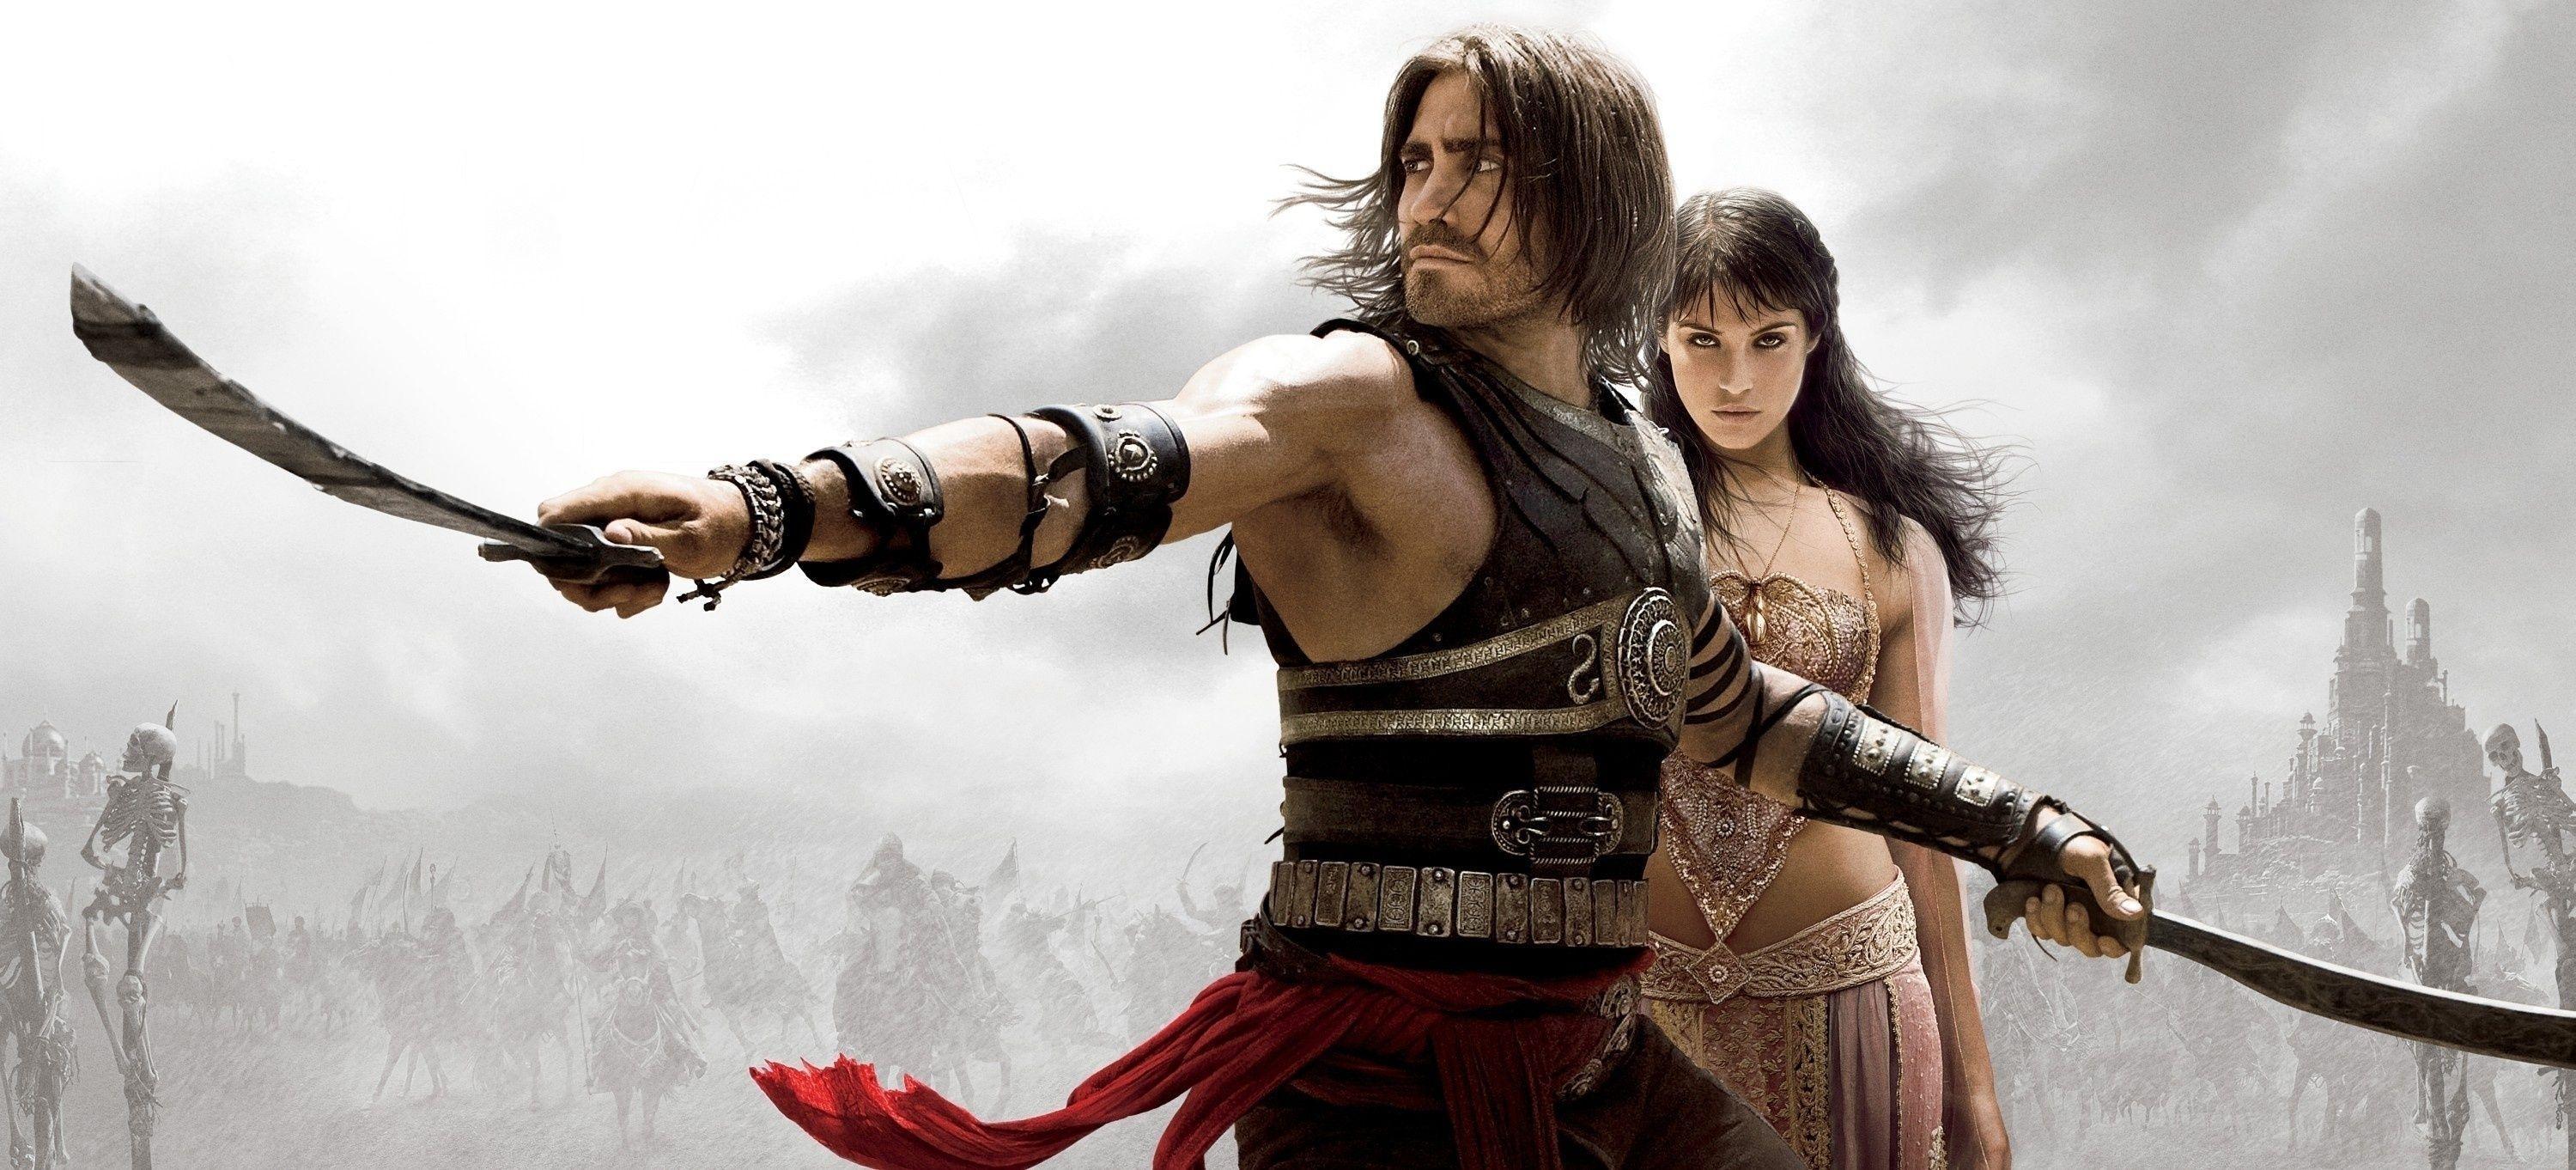 Prince of Persia: The Sands of Time HD Wallpaper. Background